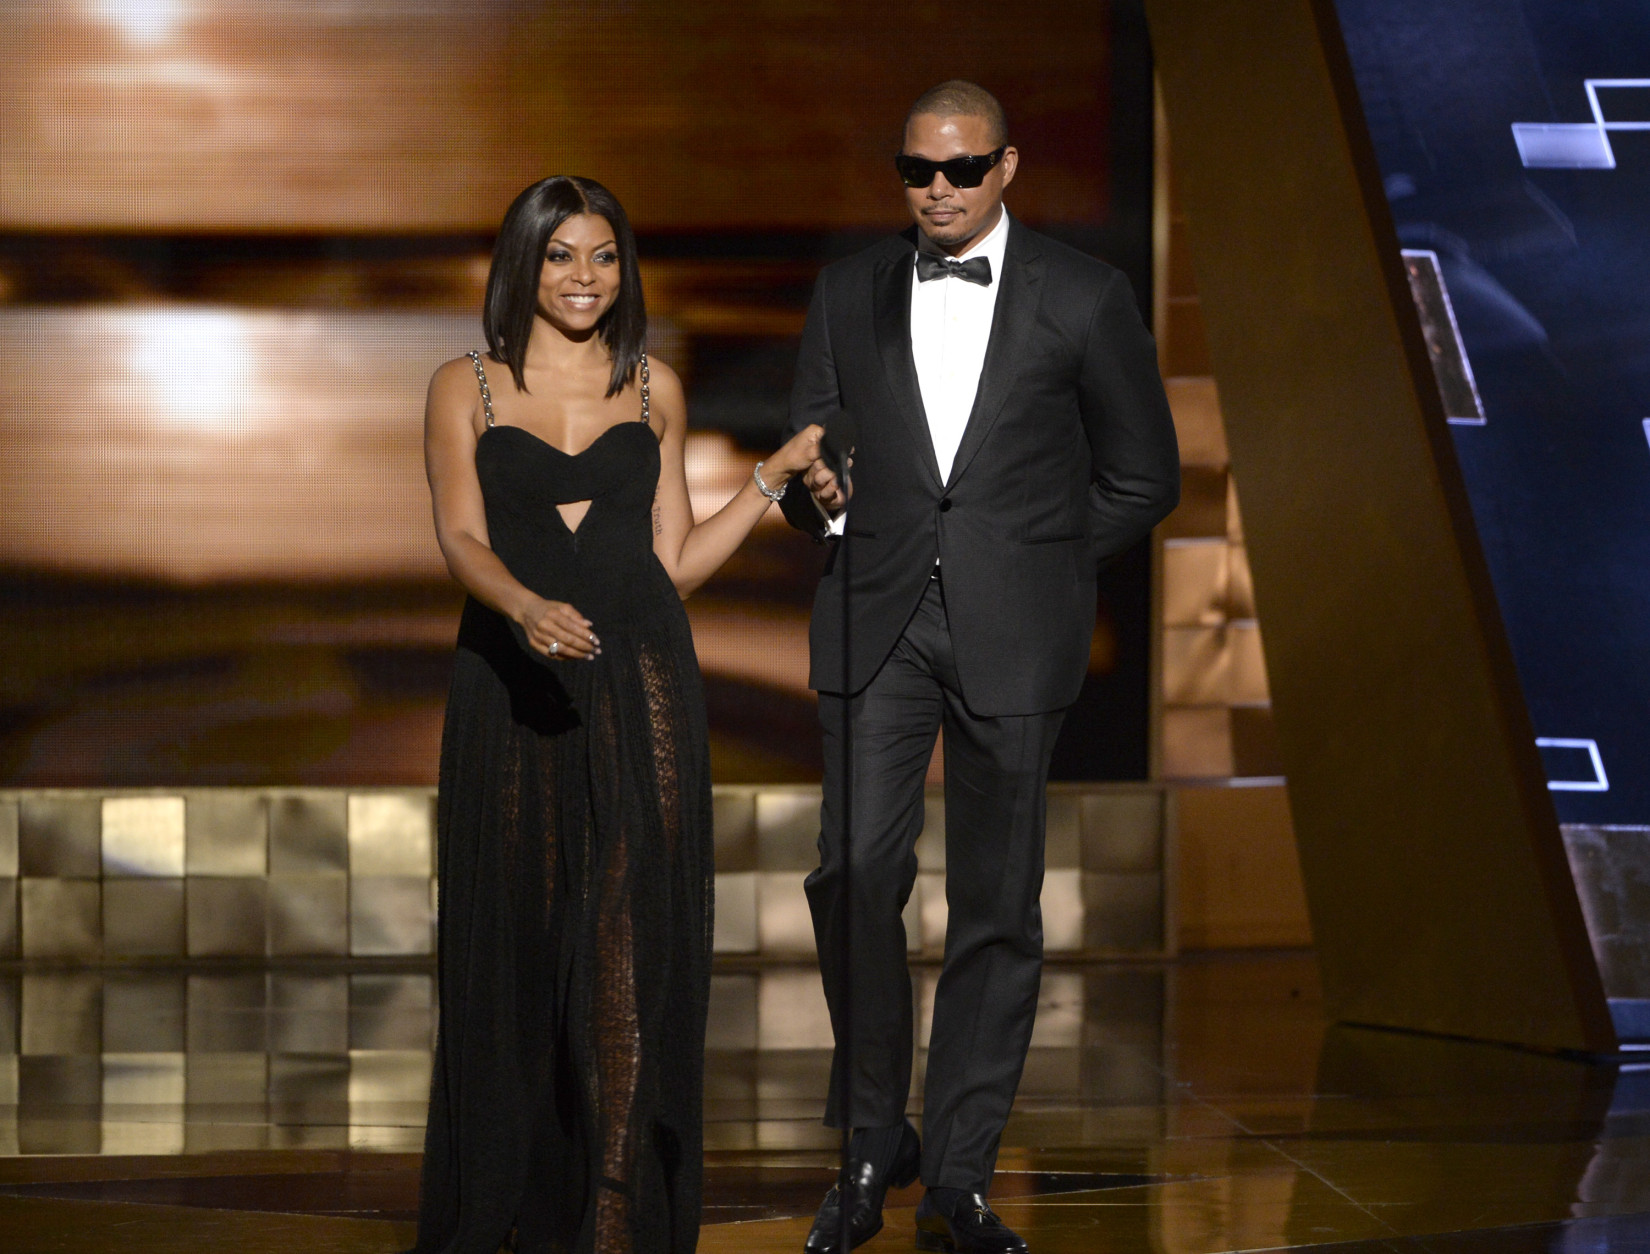 Taraji P. Henson, left, and Terrence Howard presents the award for outstanding writing for a limited series, movie or a dramatic special at the 67th Primetime Emmy Awards on Sunday, Sept. 20, 2015, at the Microsoft Theater in Los Angeles. (Photo by Phil McCarten/Invision for the Television Academy/AP Images)